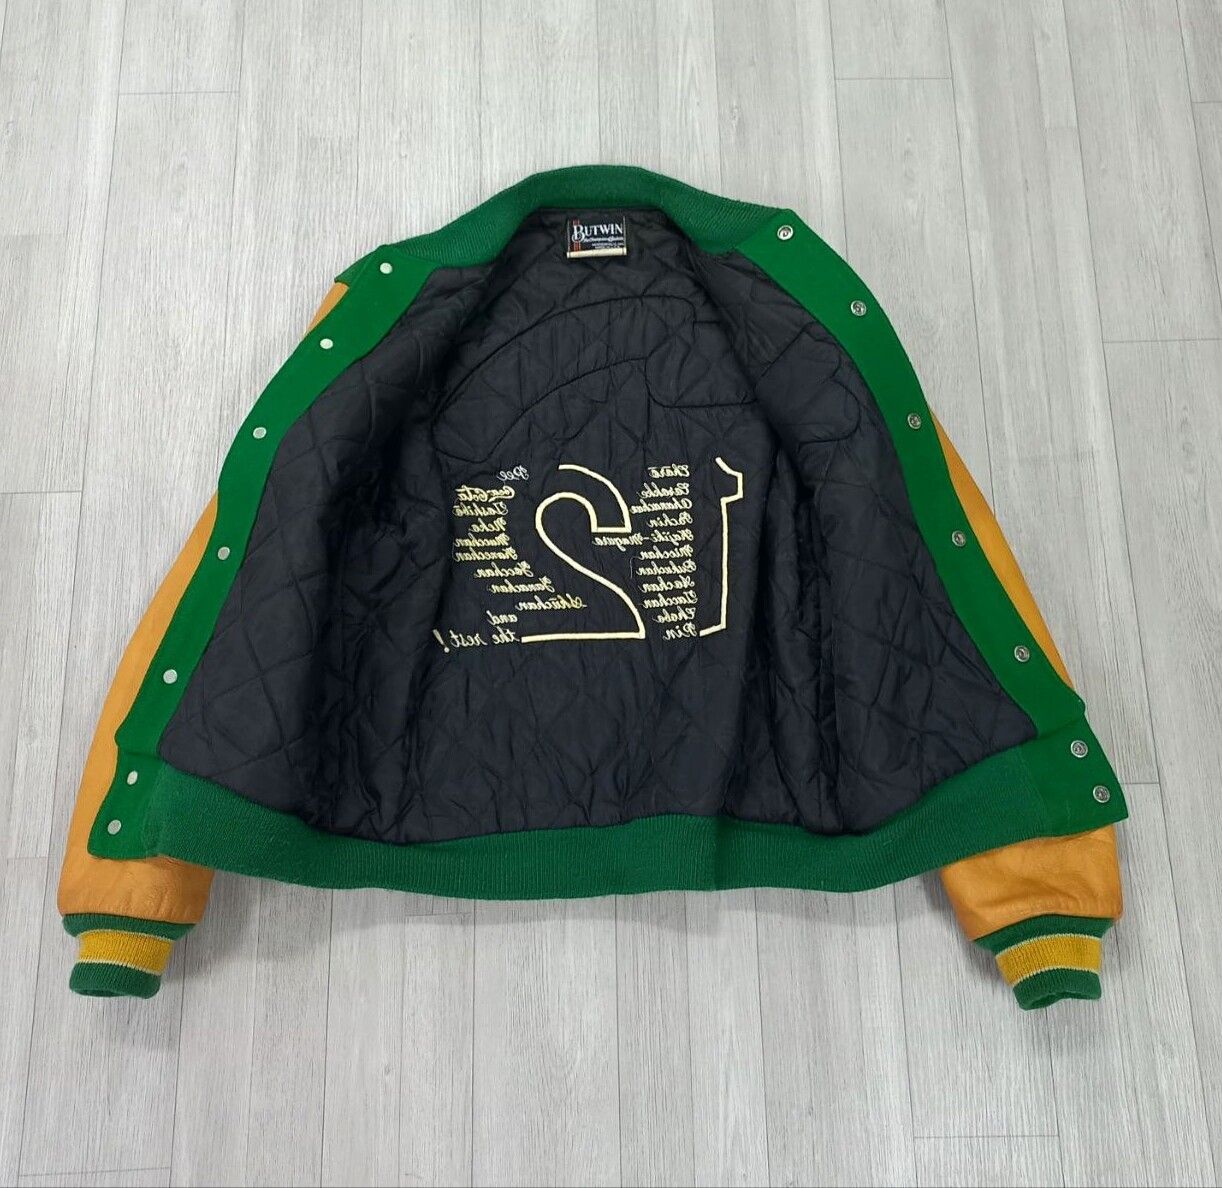 Union Made - HANTEN CLUB 1984 by BUTWIN USA Wool Leather Varsity Jacket - 15